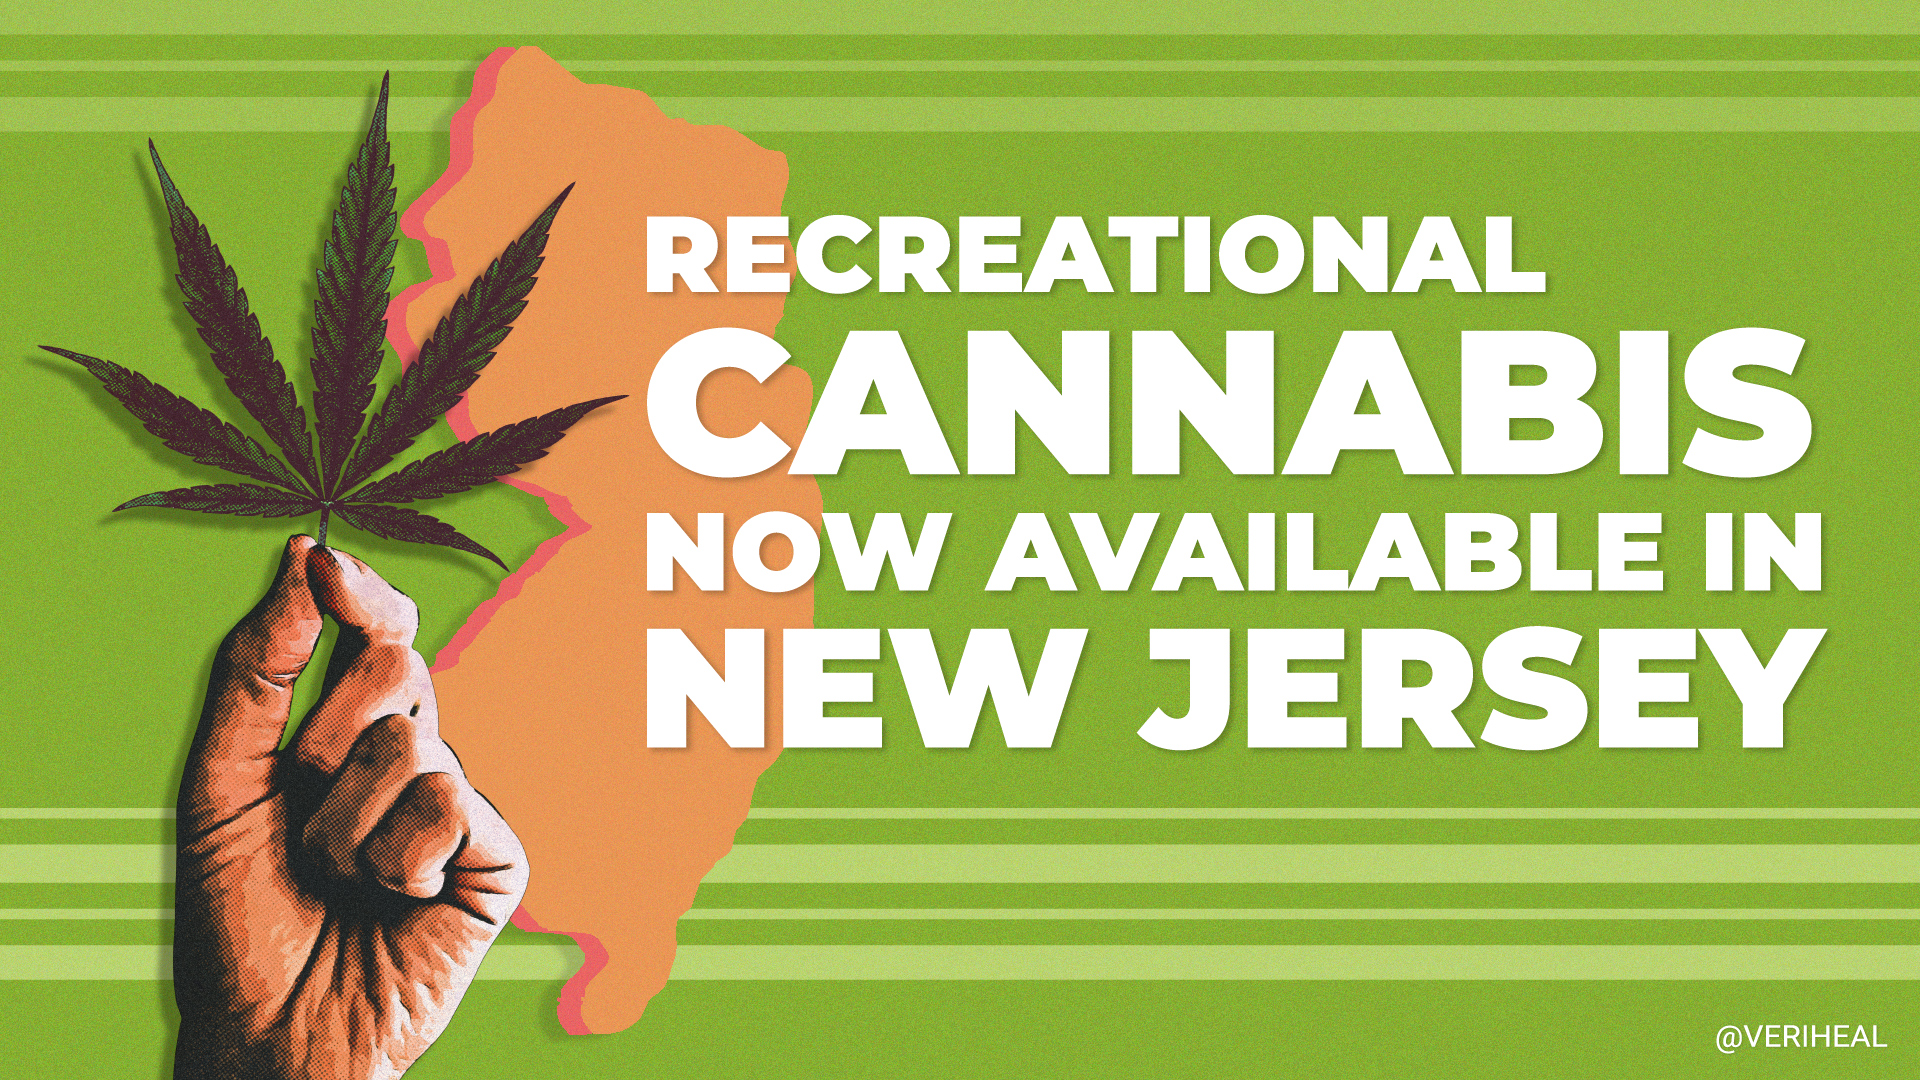 NYC’s Rooftop Cannabis Cultivation, NM’s First Consumption Lounge, & NJ’s Recreational Market Launch